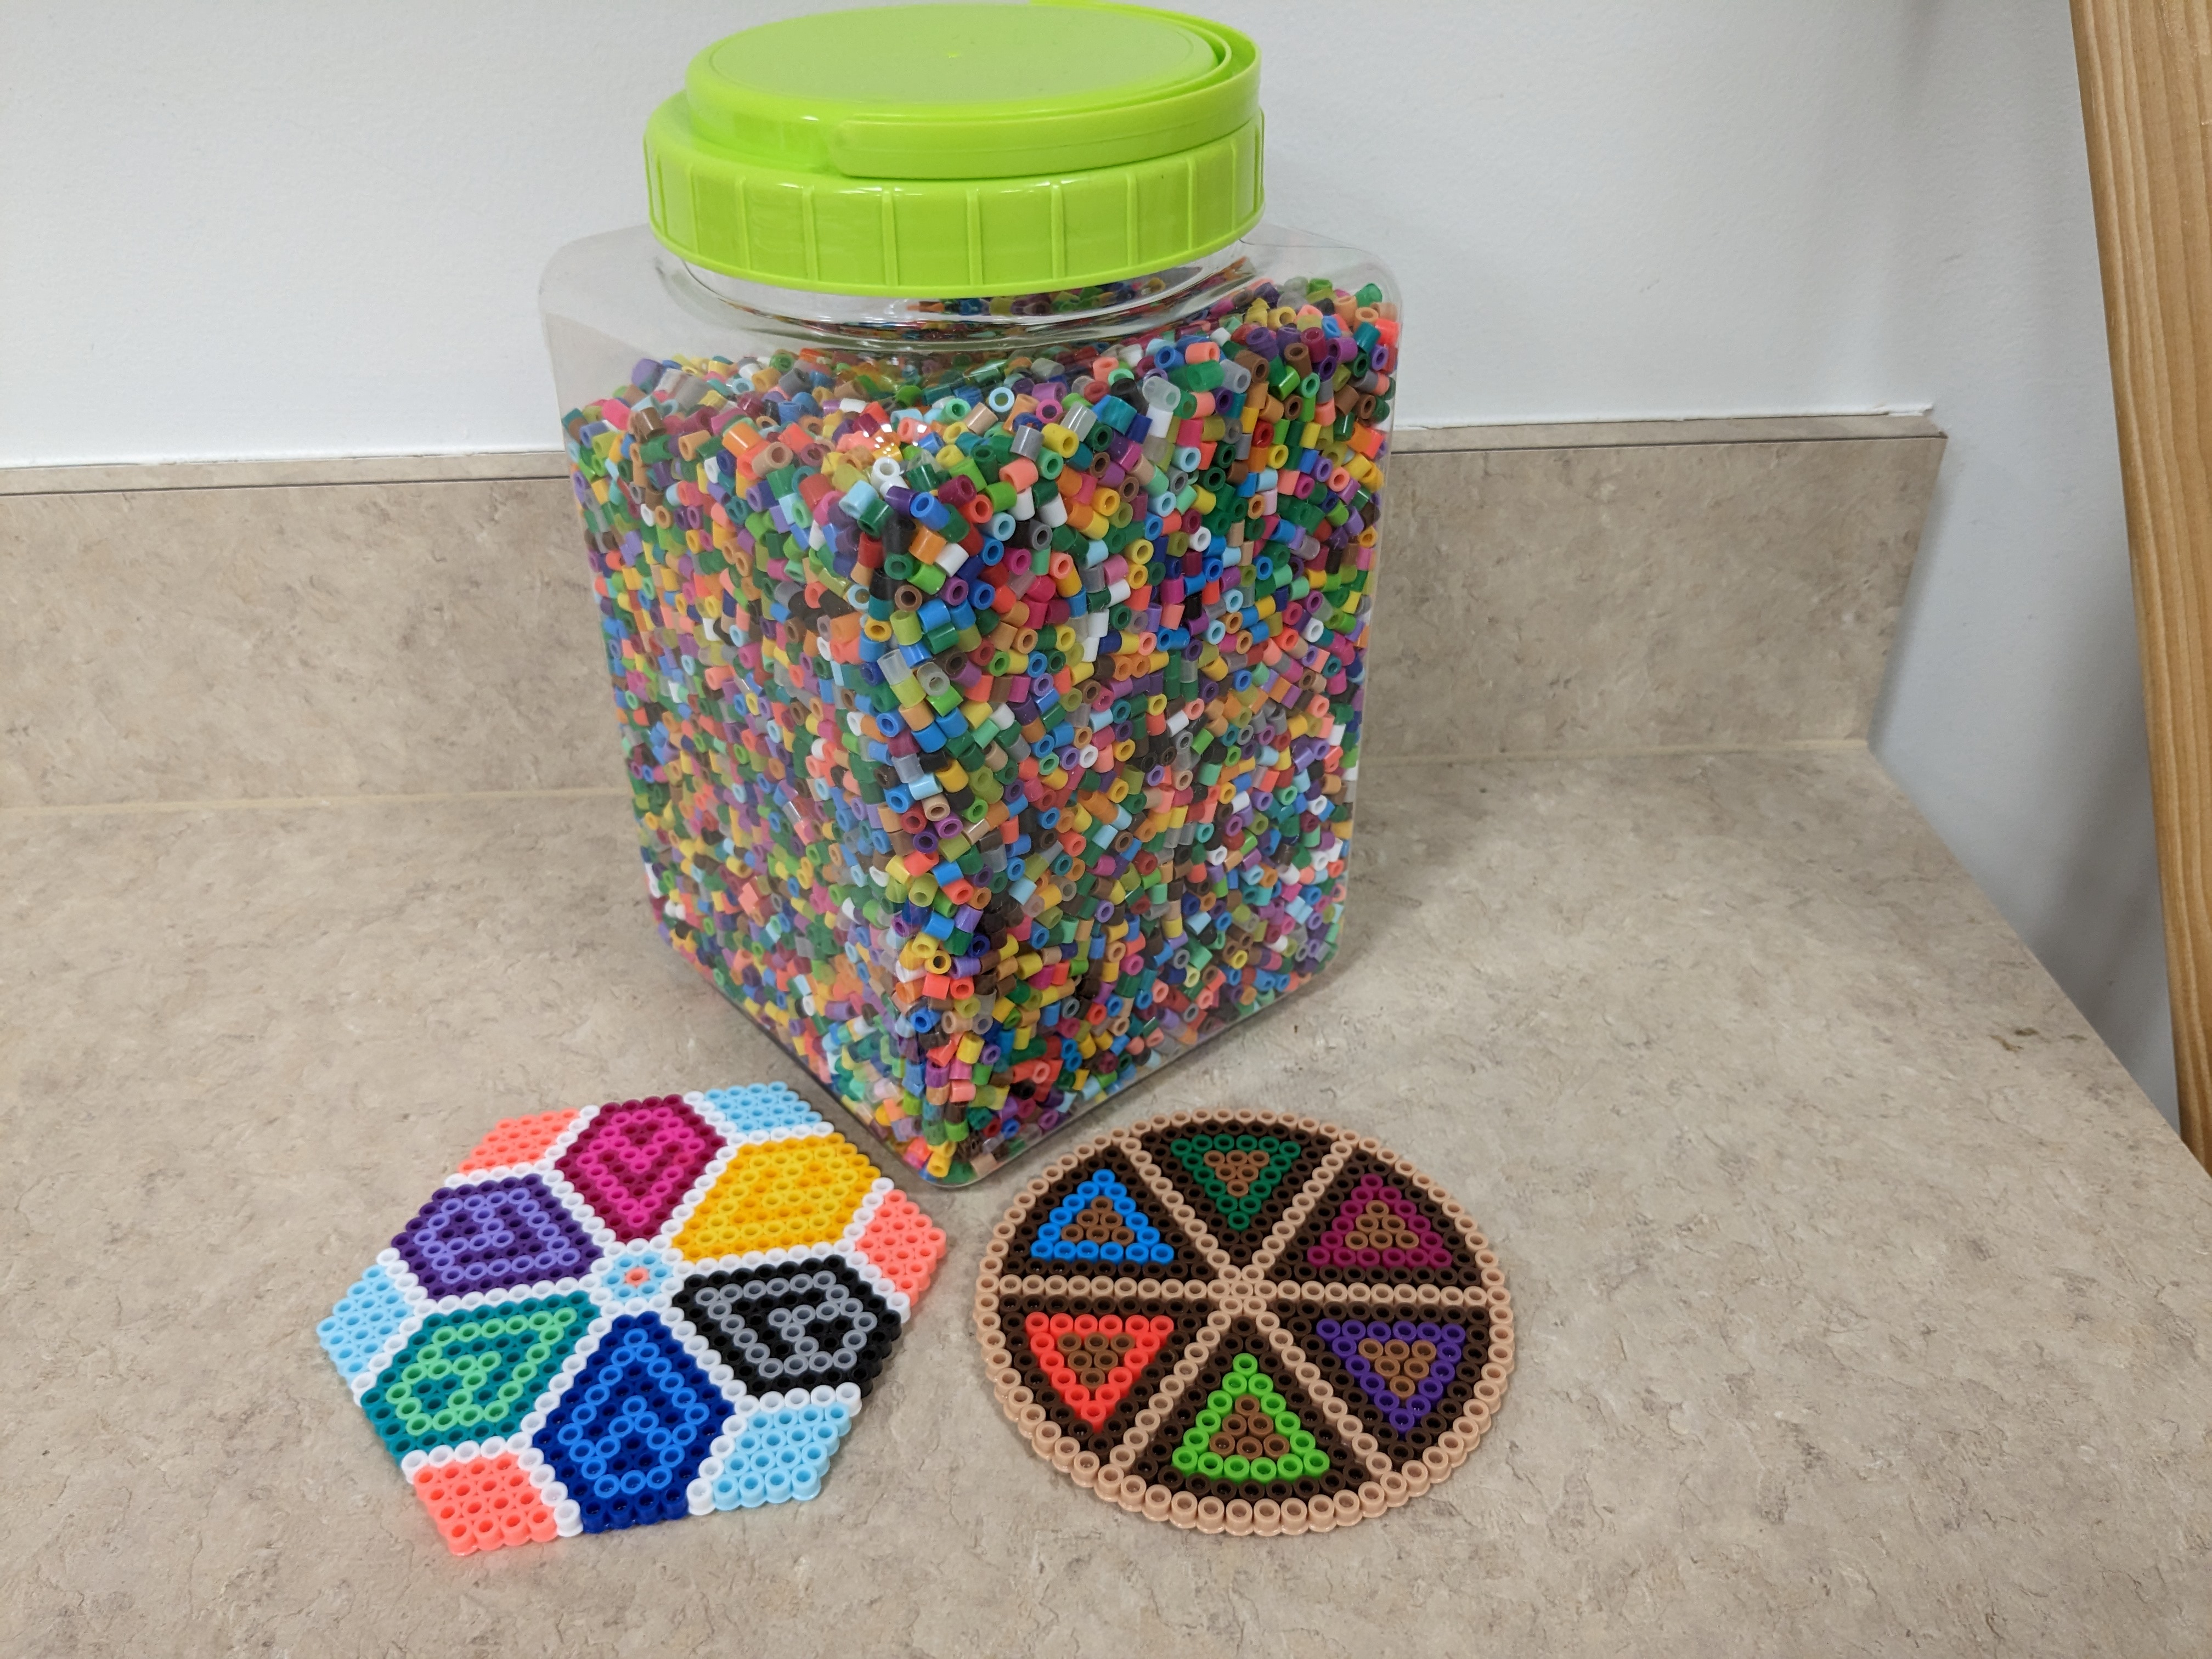 containter of beads and two coasters made from perler beads